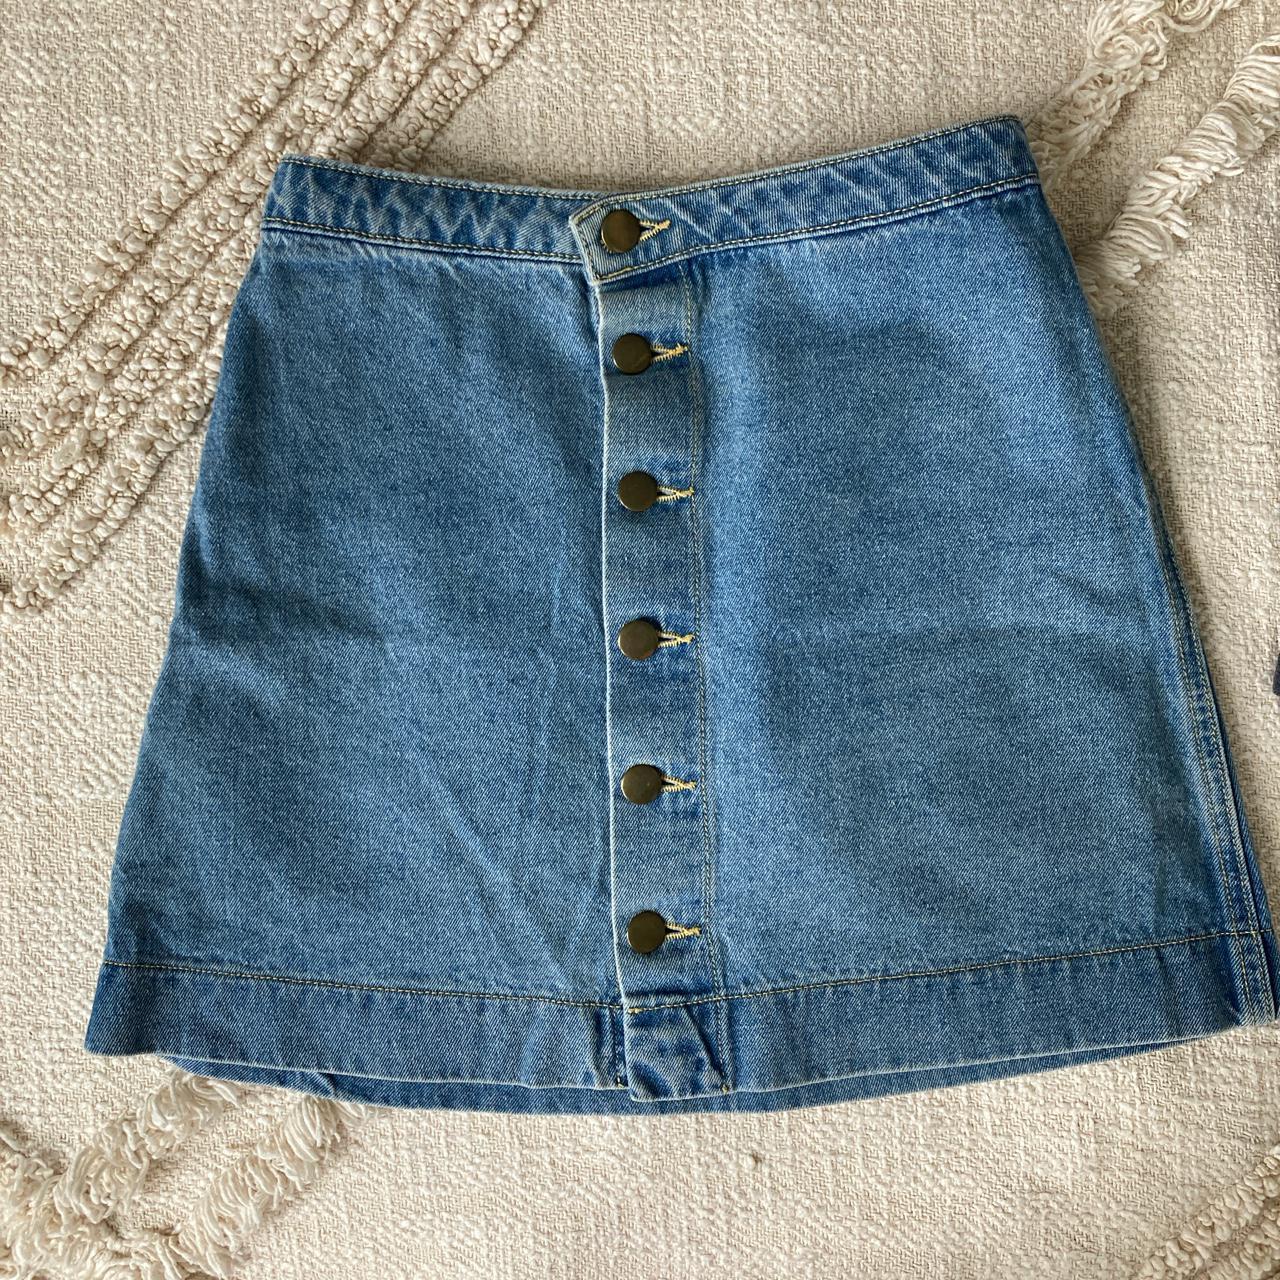 Product Image 3 - American apparel jeans mini skirt.